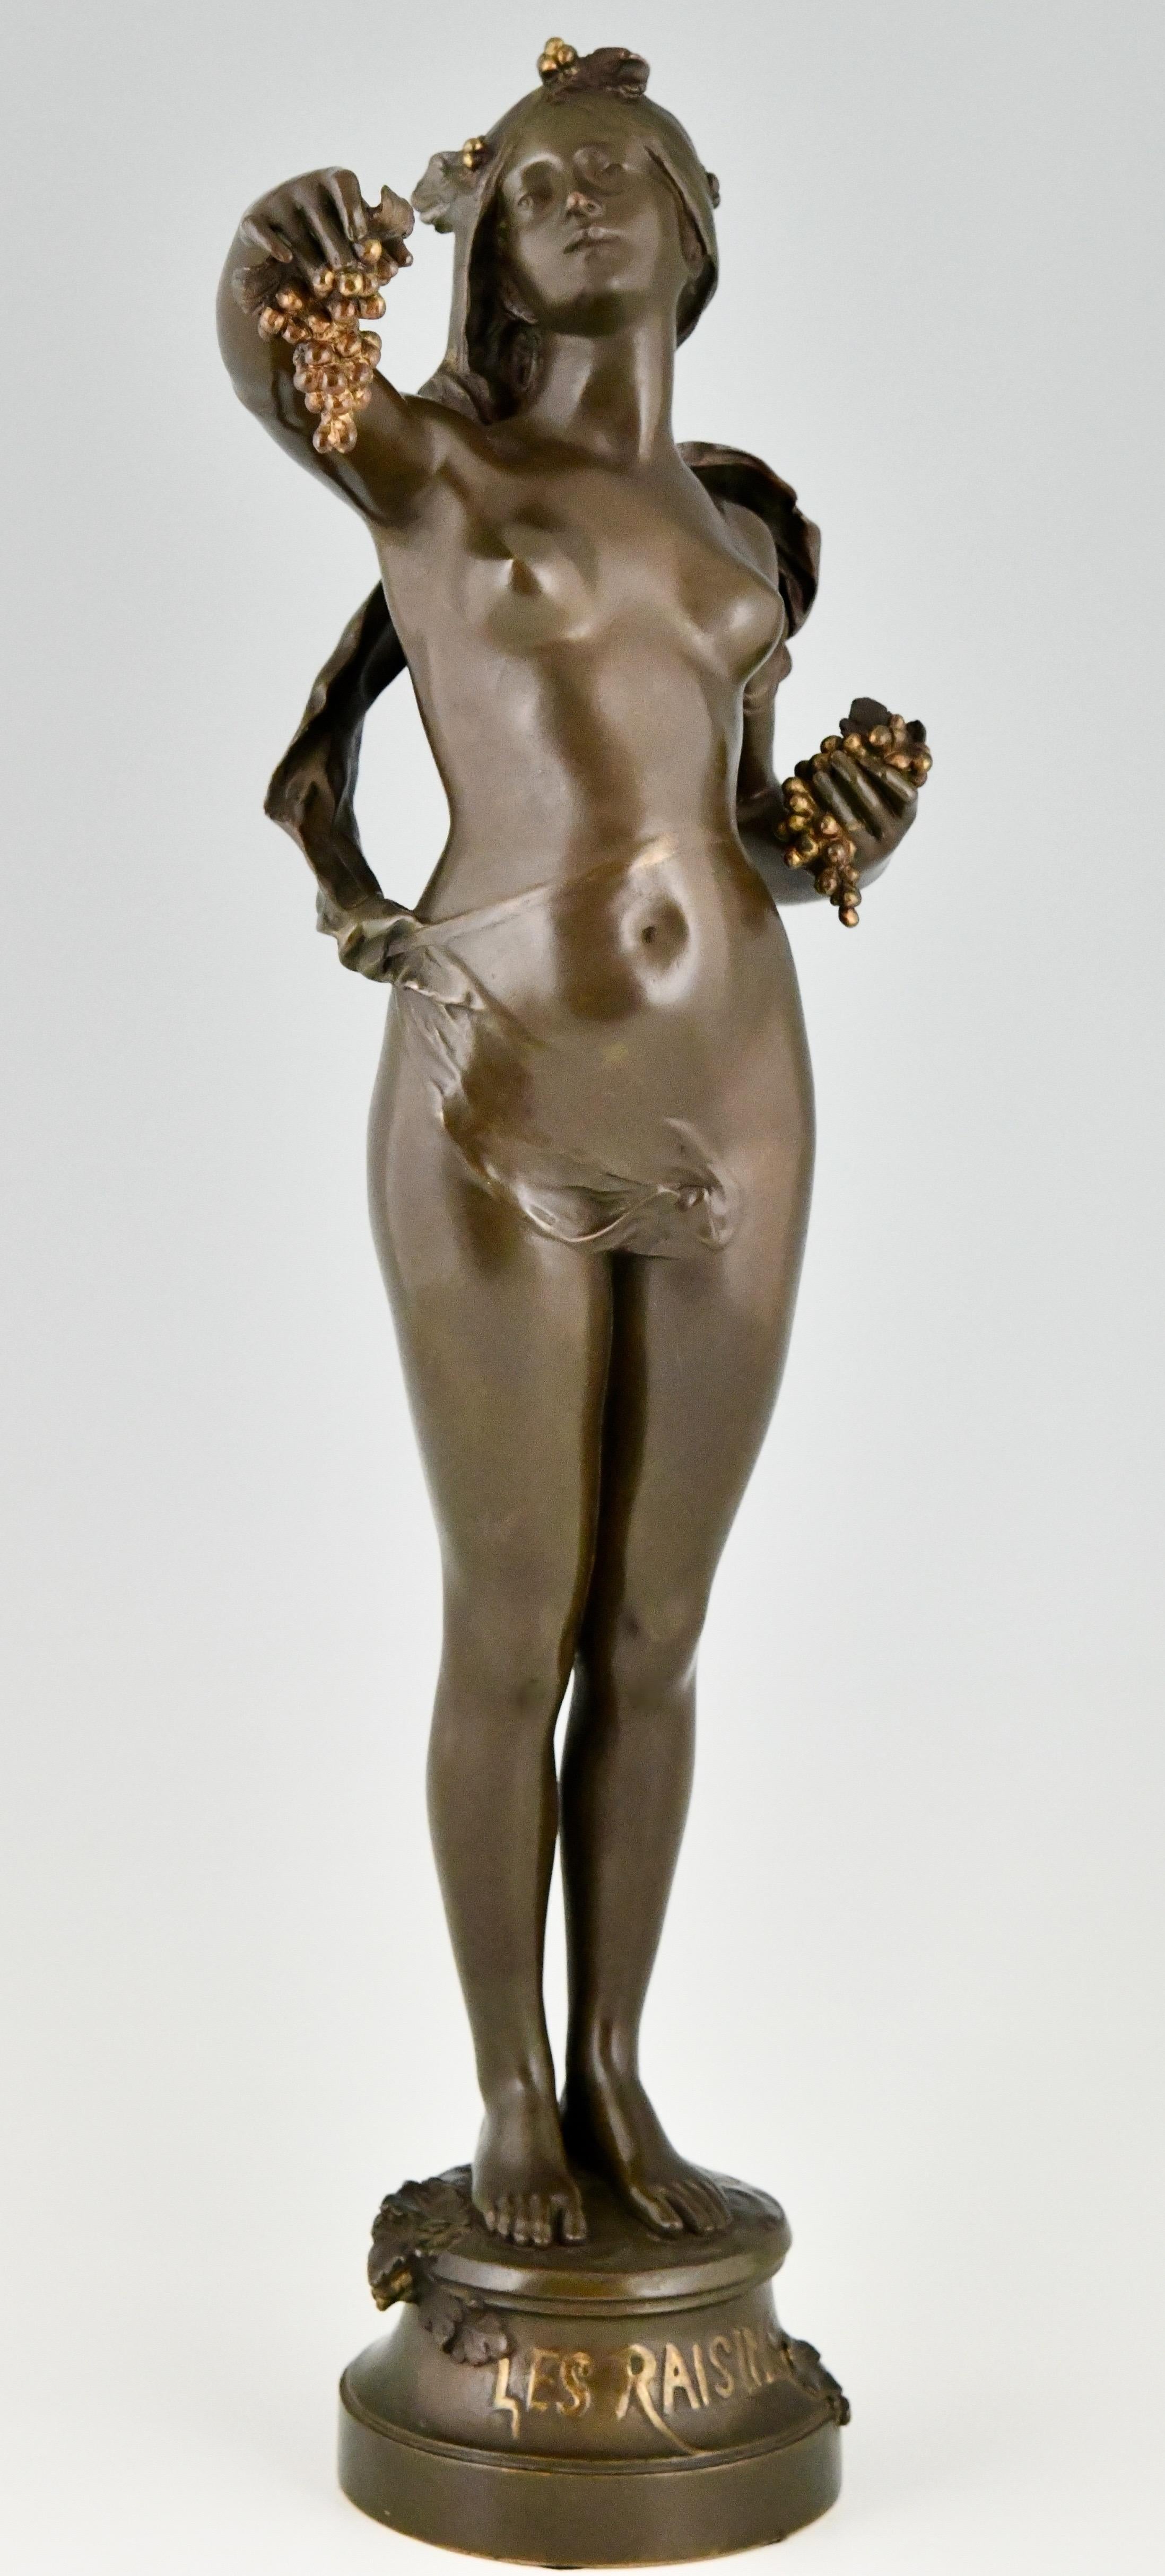 Les raisins, Beautiful tall Art Nouveau bronze sculpture of a standing nude holding raisins.
Signed Maurice Bouval with foundry mark Colin Paris.
Literature:
“Dynamic Beauty” Macklowe Gallery?“Bronzes, sculptors and founders” by H. Berman, Abage